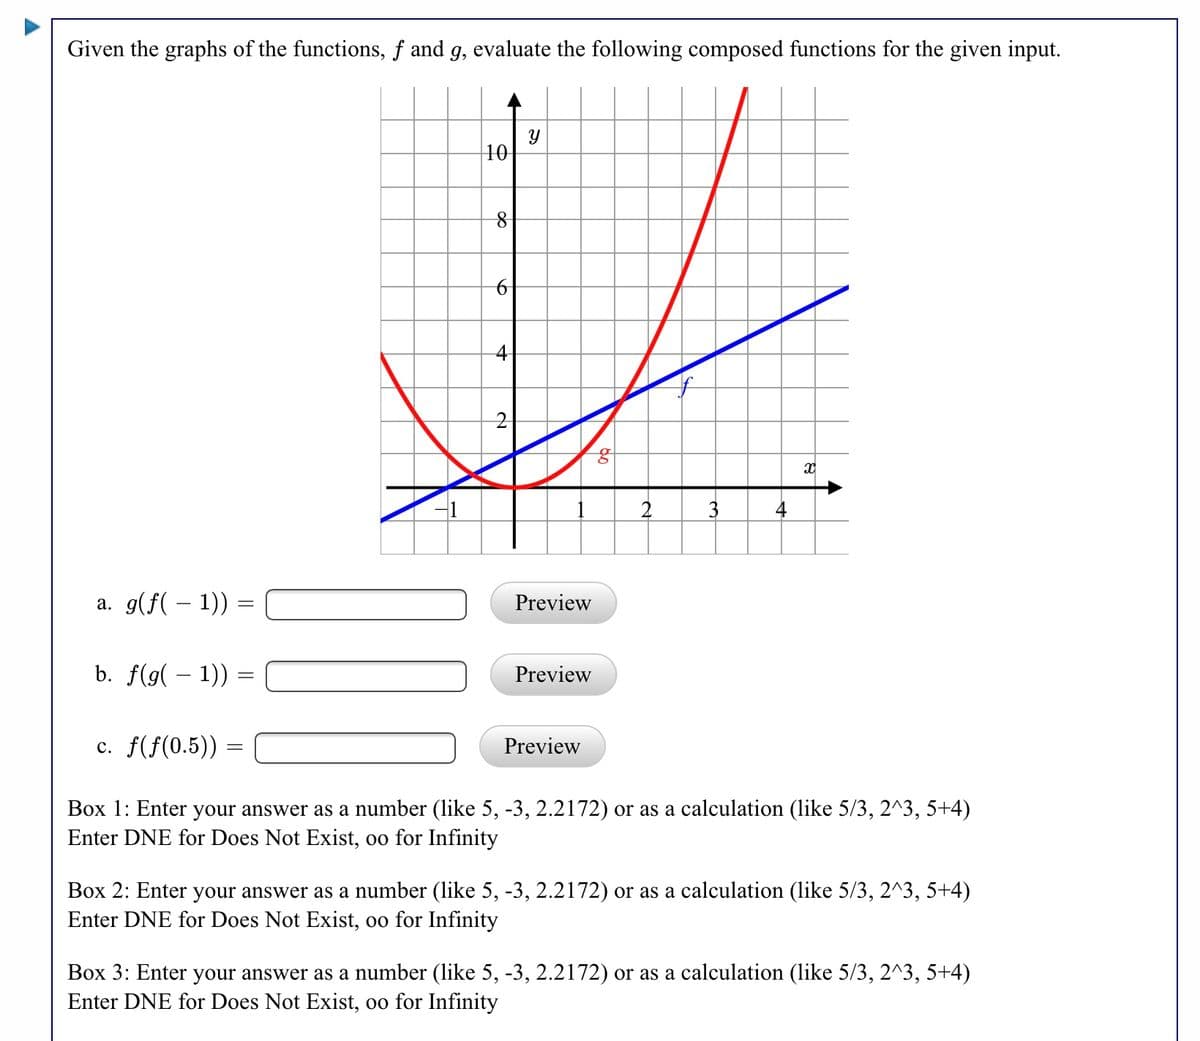 Given the graphs of the functions, f and g, evaluate the following composed functions for the given input.
10
4-
4
a. g(f( – 1)) =
Preview
b. f(g( – 1)) =
Preview
c. f(f(0.5)) =
Preview
Box 1: Enter your answer as a number (like 5, -3, 2.2172) or as a calculation (like 5/3, 2^3, 5+4)
Enter DNE for Does Not Exist, oo for Infinity
Box 2: Enter your answer as a number (like 5, -3, 2.2172) or as a calculation (like 5/3, 2^3, 5+4)
Enter DNE for Does Not Exist, oo for Infinity
Box 3: Enter your answer as a number (like 5, -3, 2.2172) or as a calculation (like 5/3, 2^3, 5+4)
Enter DNE for Does Not Exist, oo for Infinity
నా
